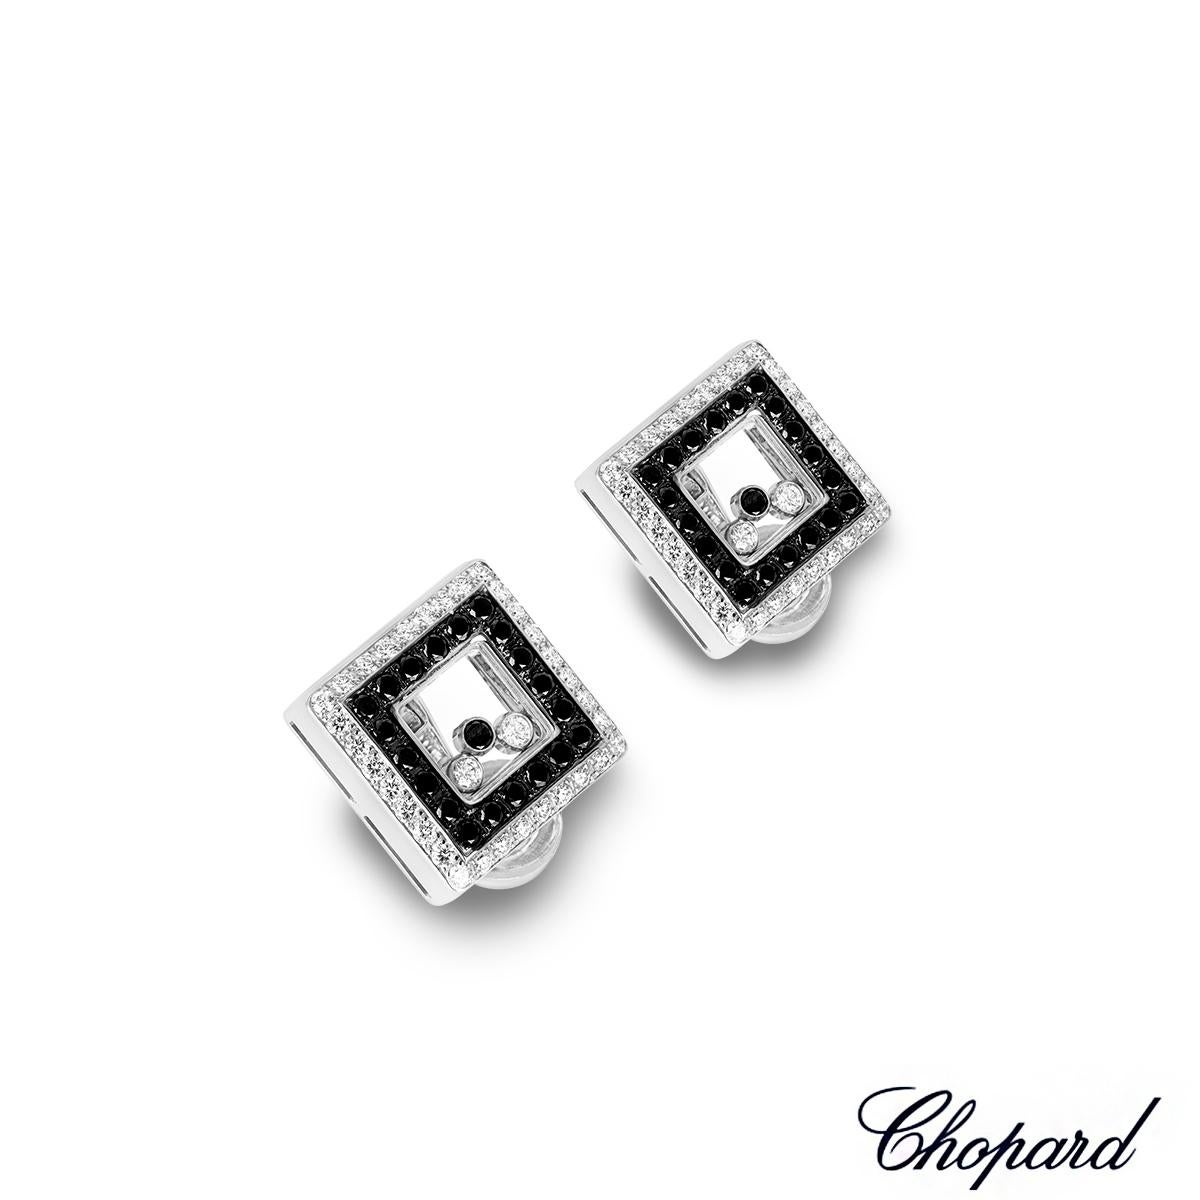 A captivating pair of 18k white gold diamond earrings by Chopard from the Happy Diamonds collection. The square earrings are each set to the outer edge with 32 round brilliant cut white diamonds, set to the inner edge with 20 round cut black